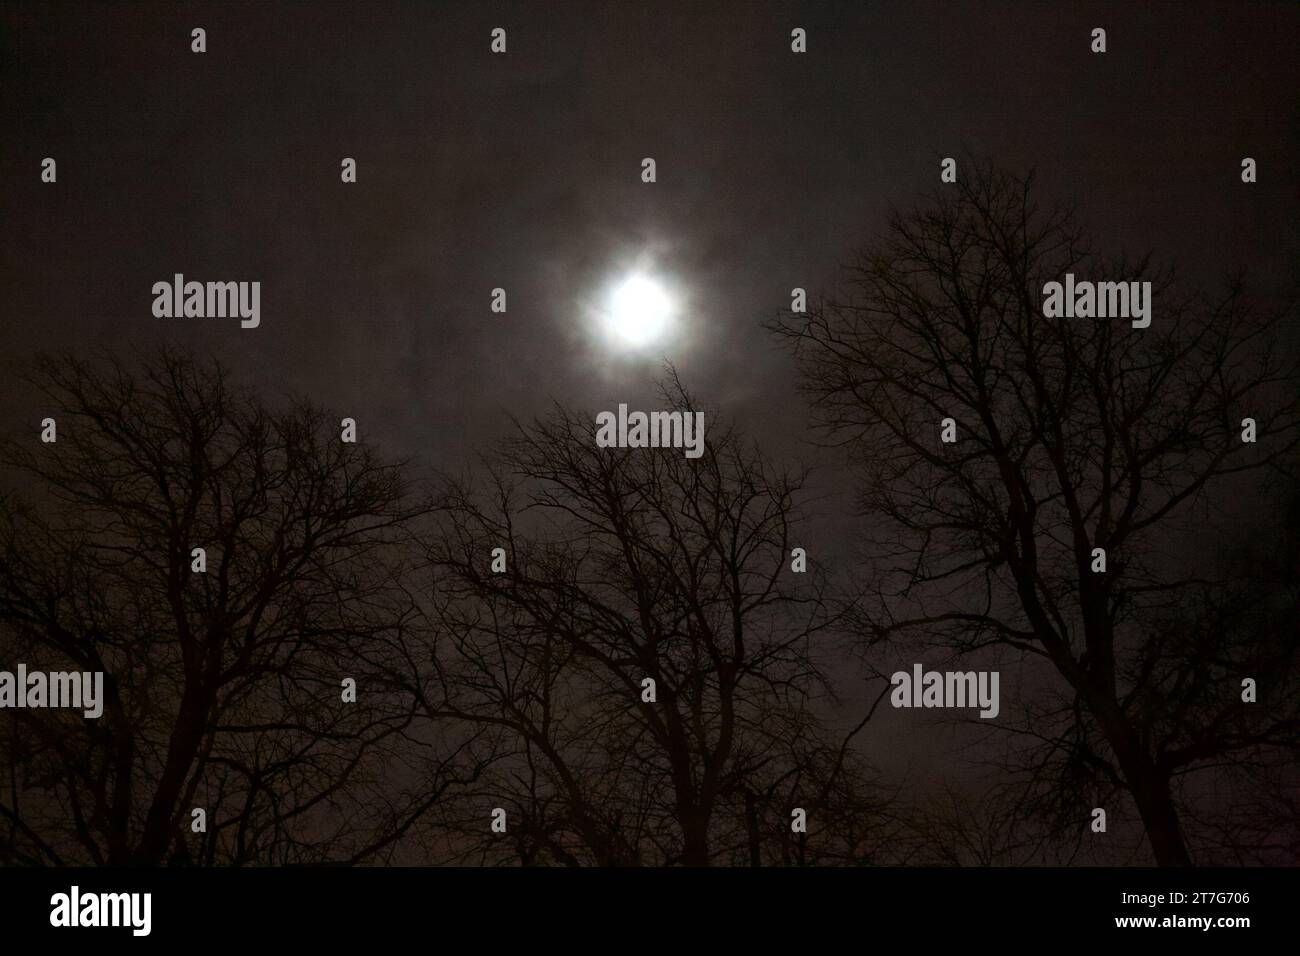 creepy full moon light at night with trees silhouetted against the dark sky. Stock Photo